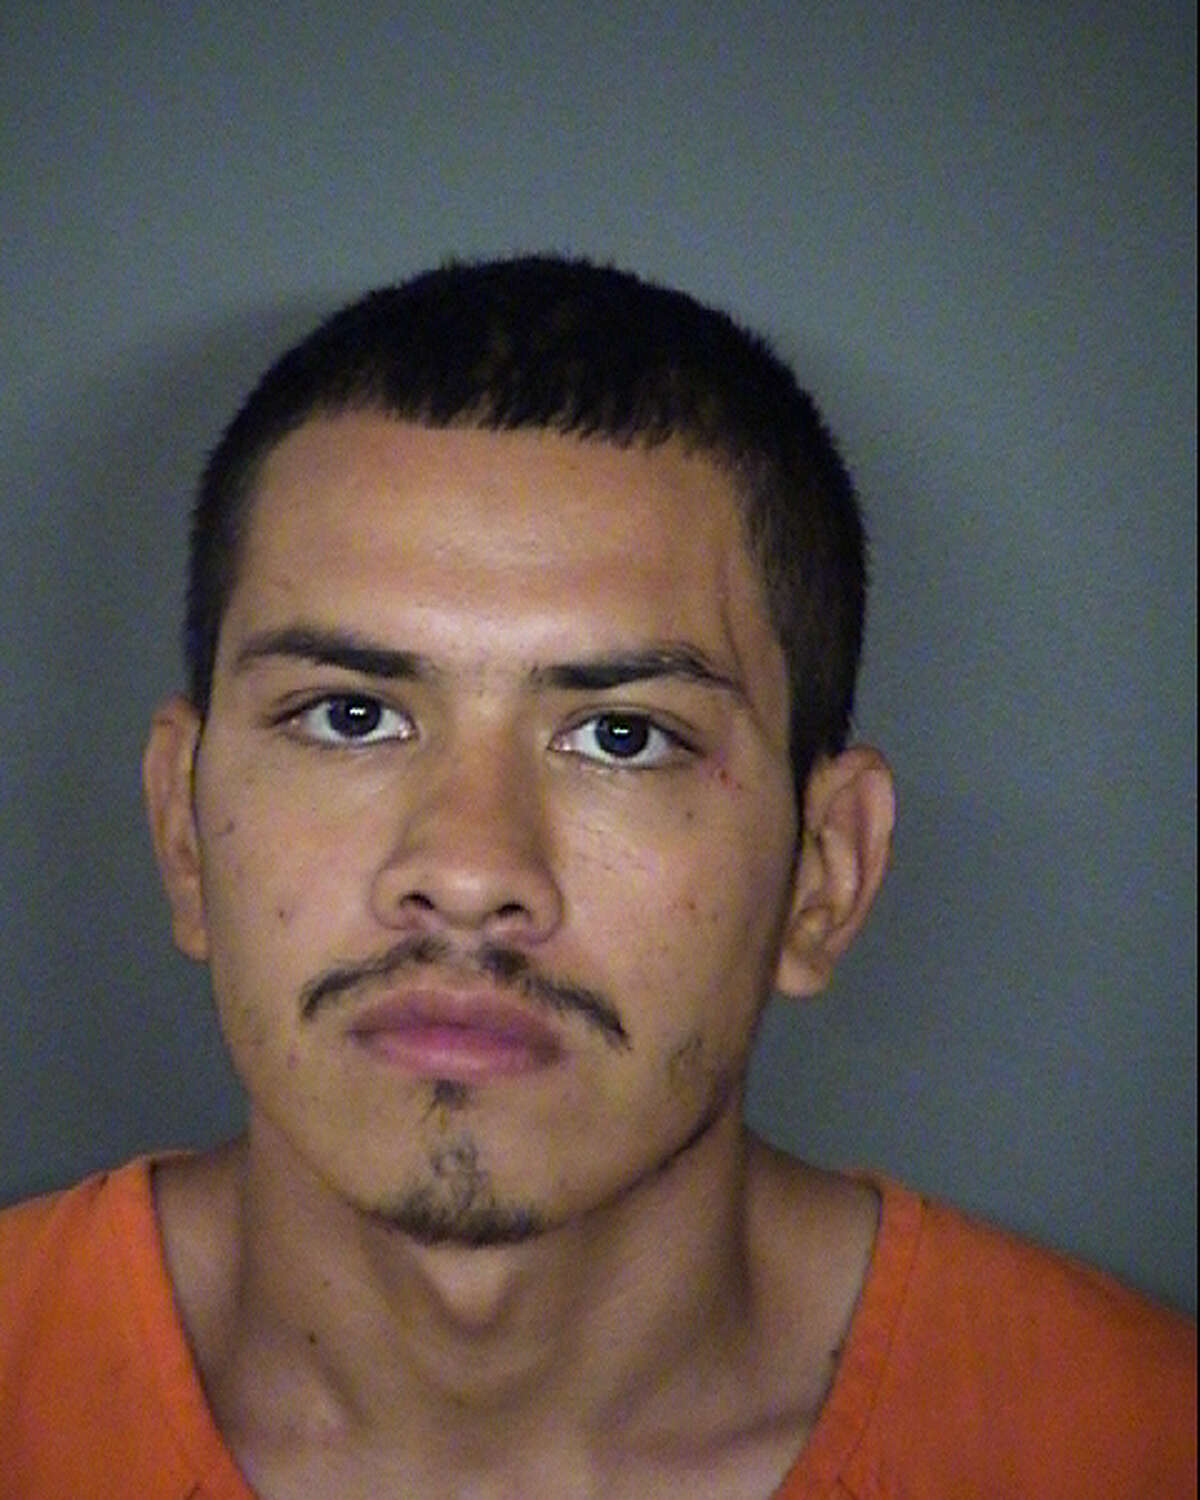 Albert Herrera, 25, is now facing two burglary charges and one theft charge. He remains in the Bexar County Jail.